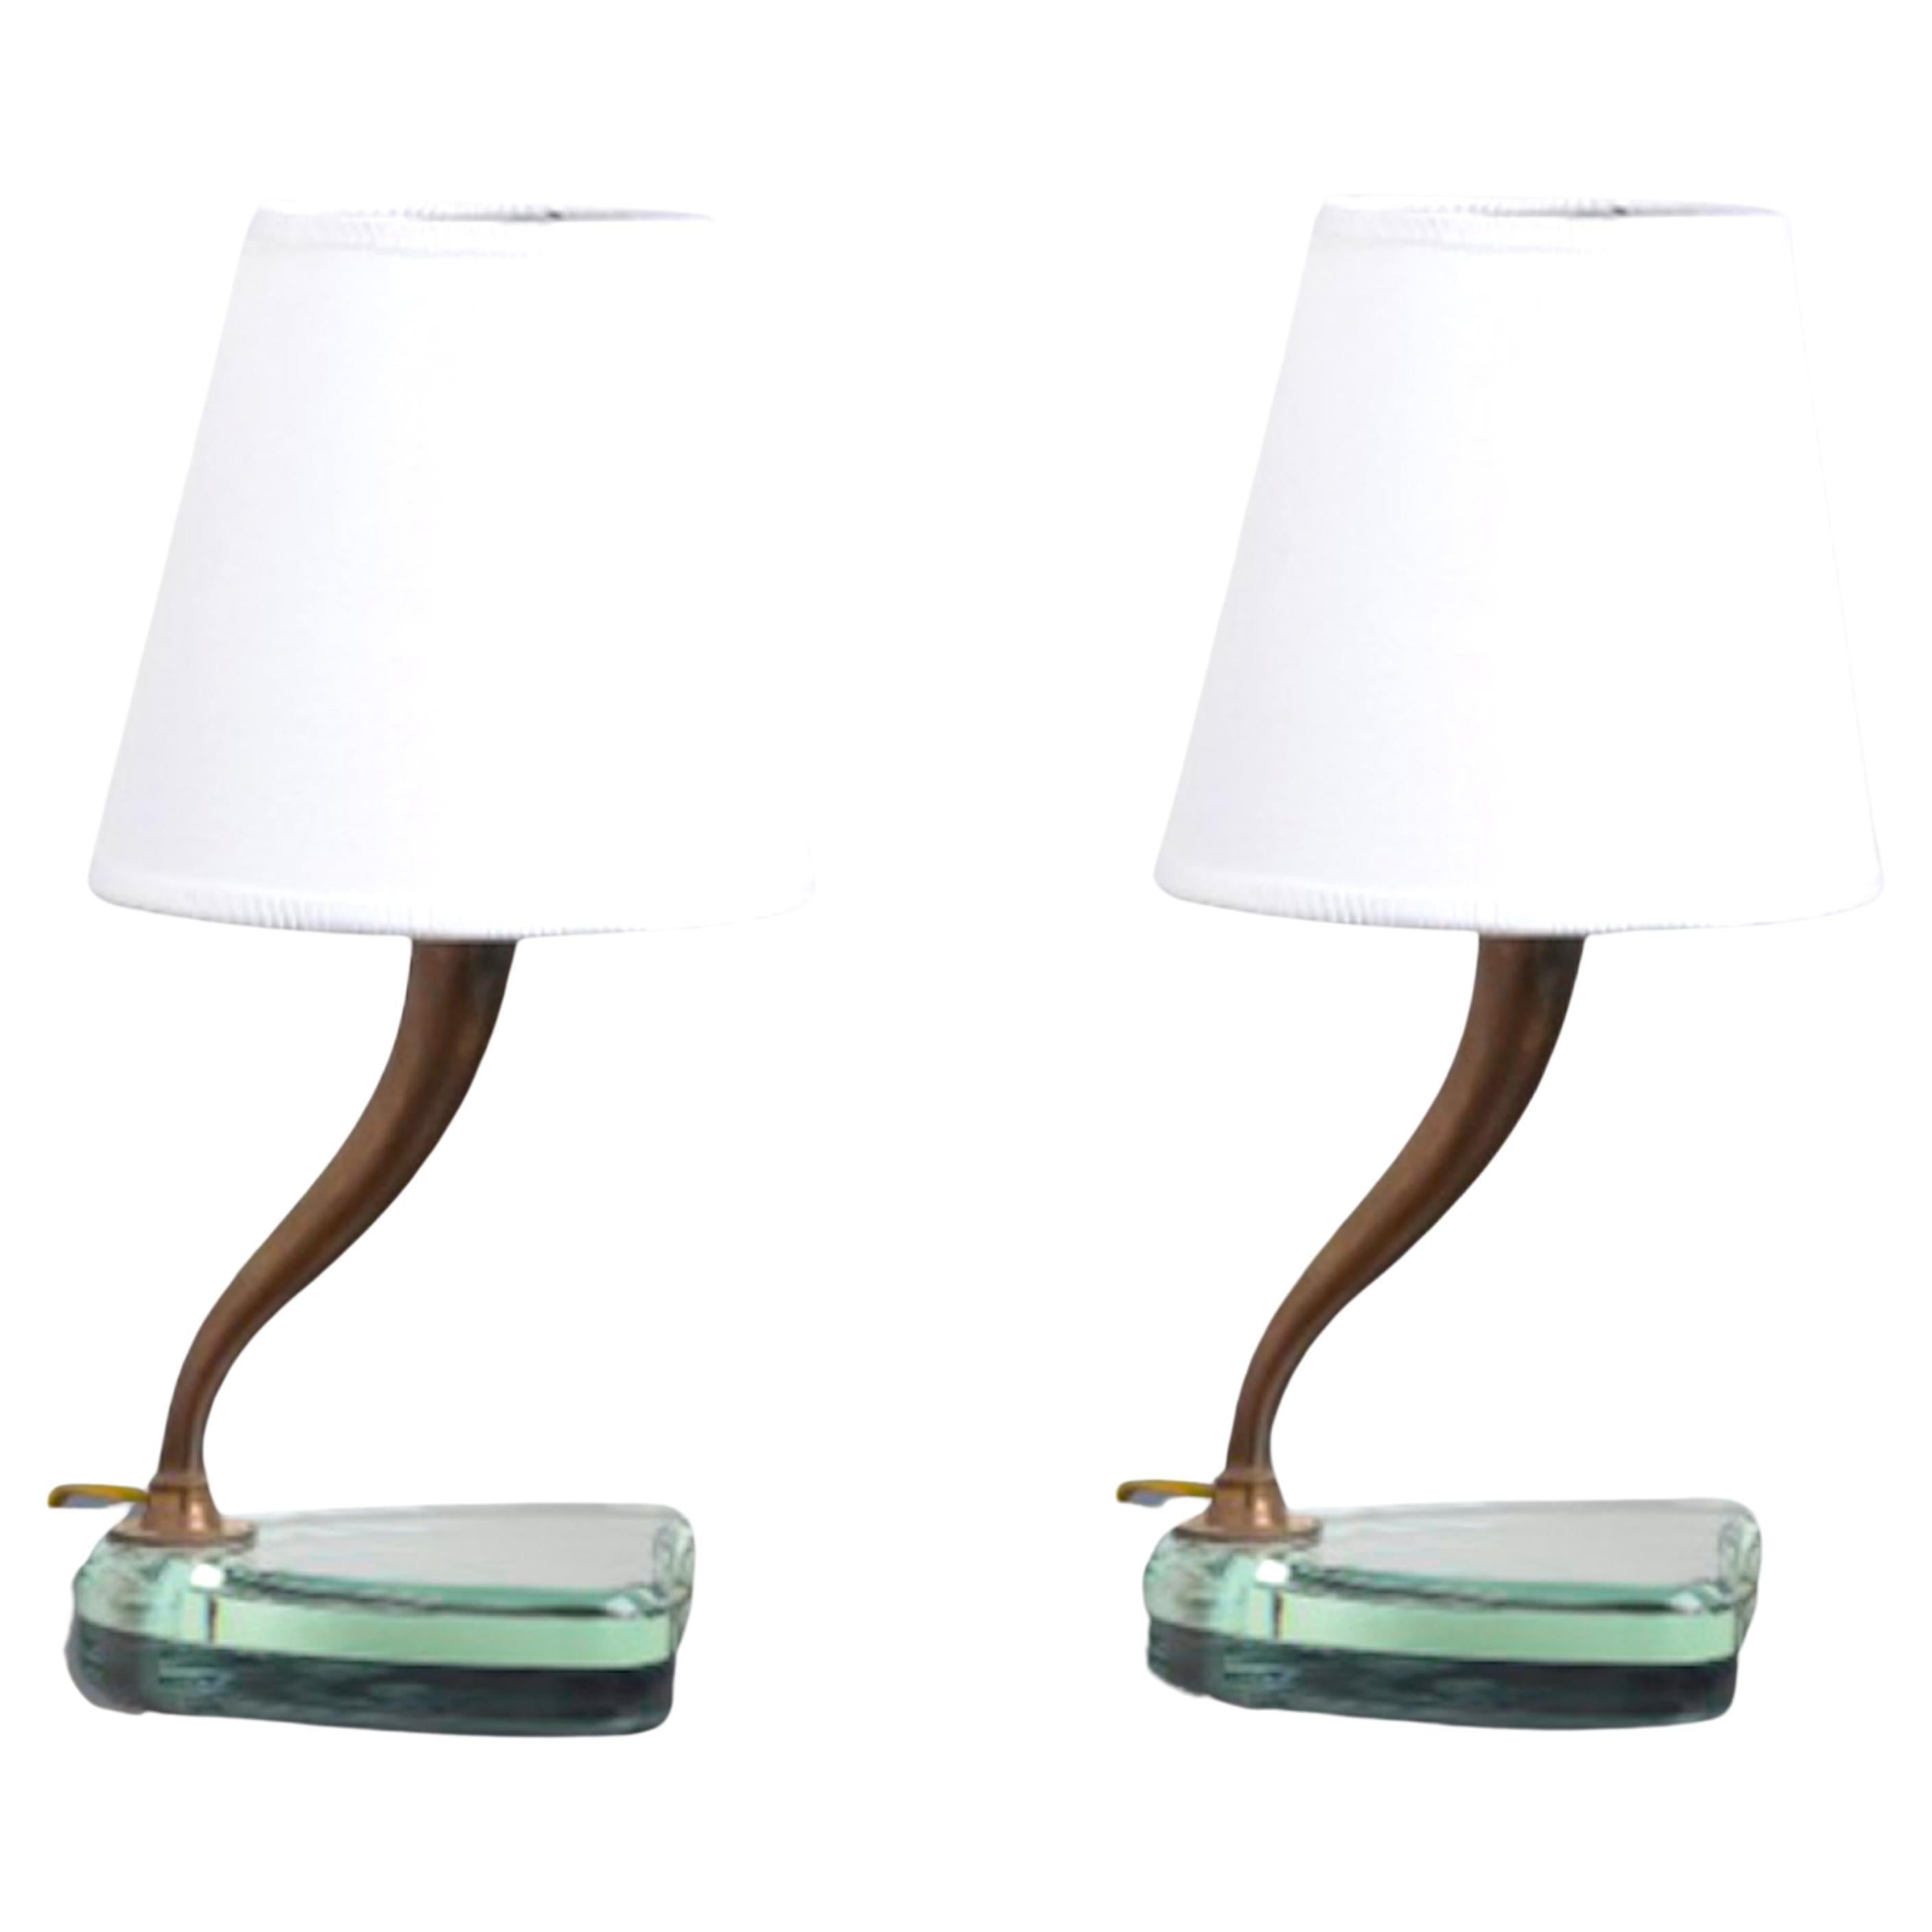 Pair of Table Lamps by Emilio Lancia, Crystal and Brass, Italy 1930s